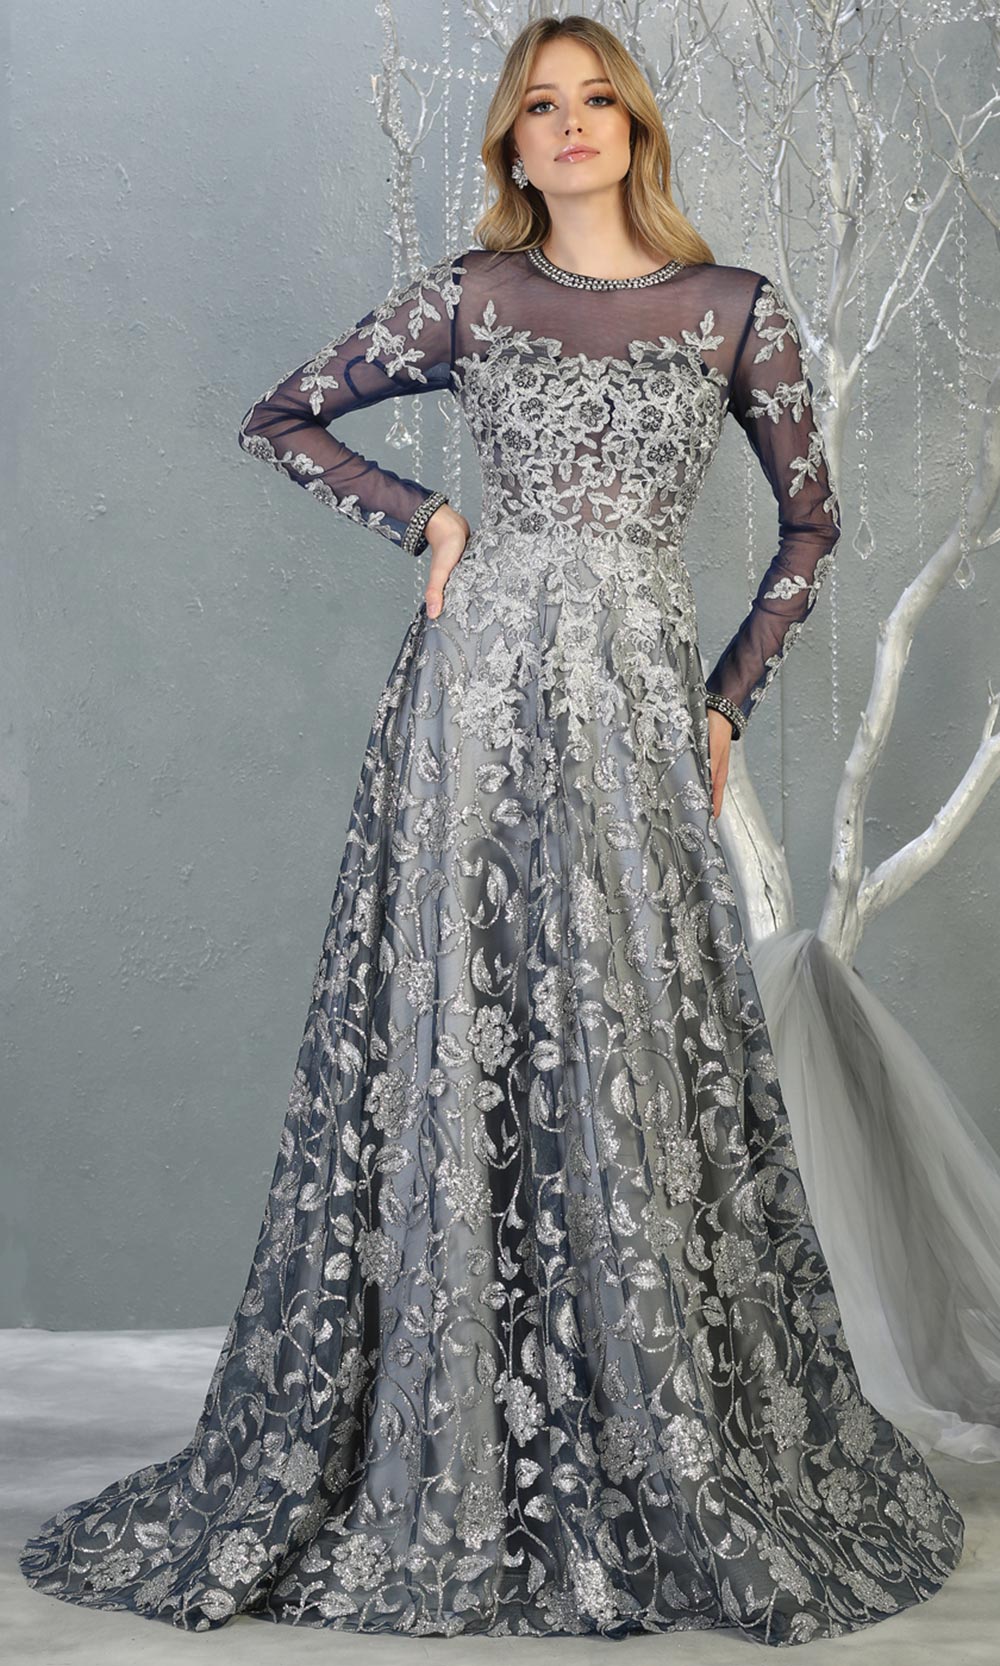 Mayqueen RQ7875 long navy silver modest evening dress w/long sleeves. Full length navy grey flowy gown is perfect for  enagagement/e-shoot dress, mother of bride, muslim evening party dress, prom, indowestern, wedding reception. Plus sizes avail.jpg